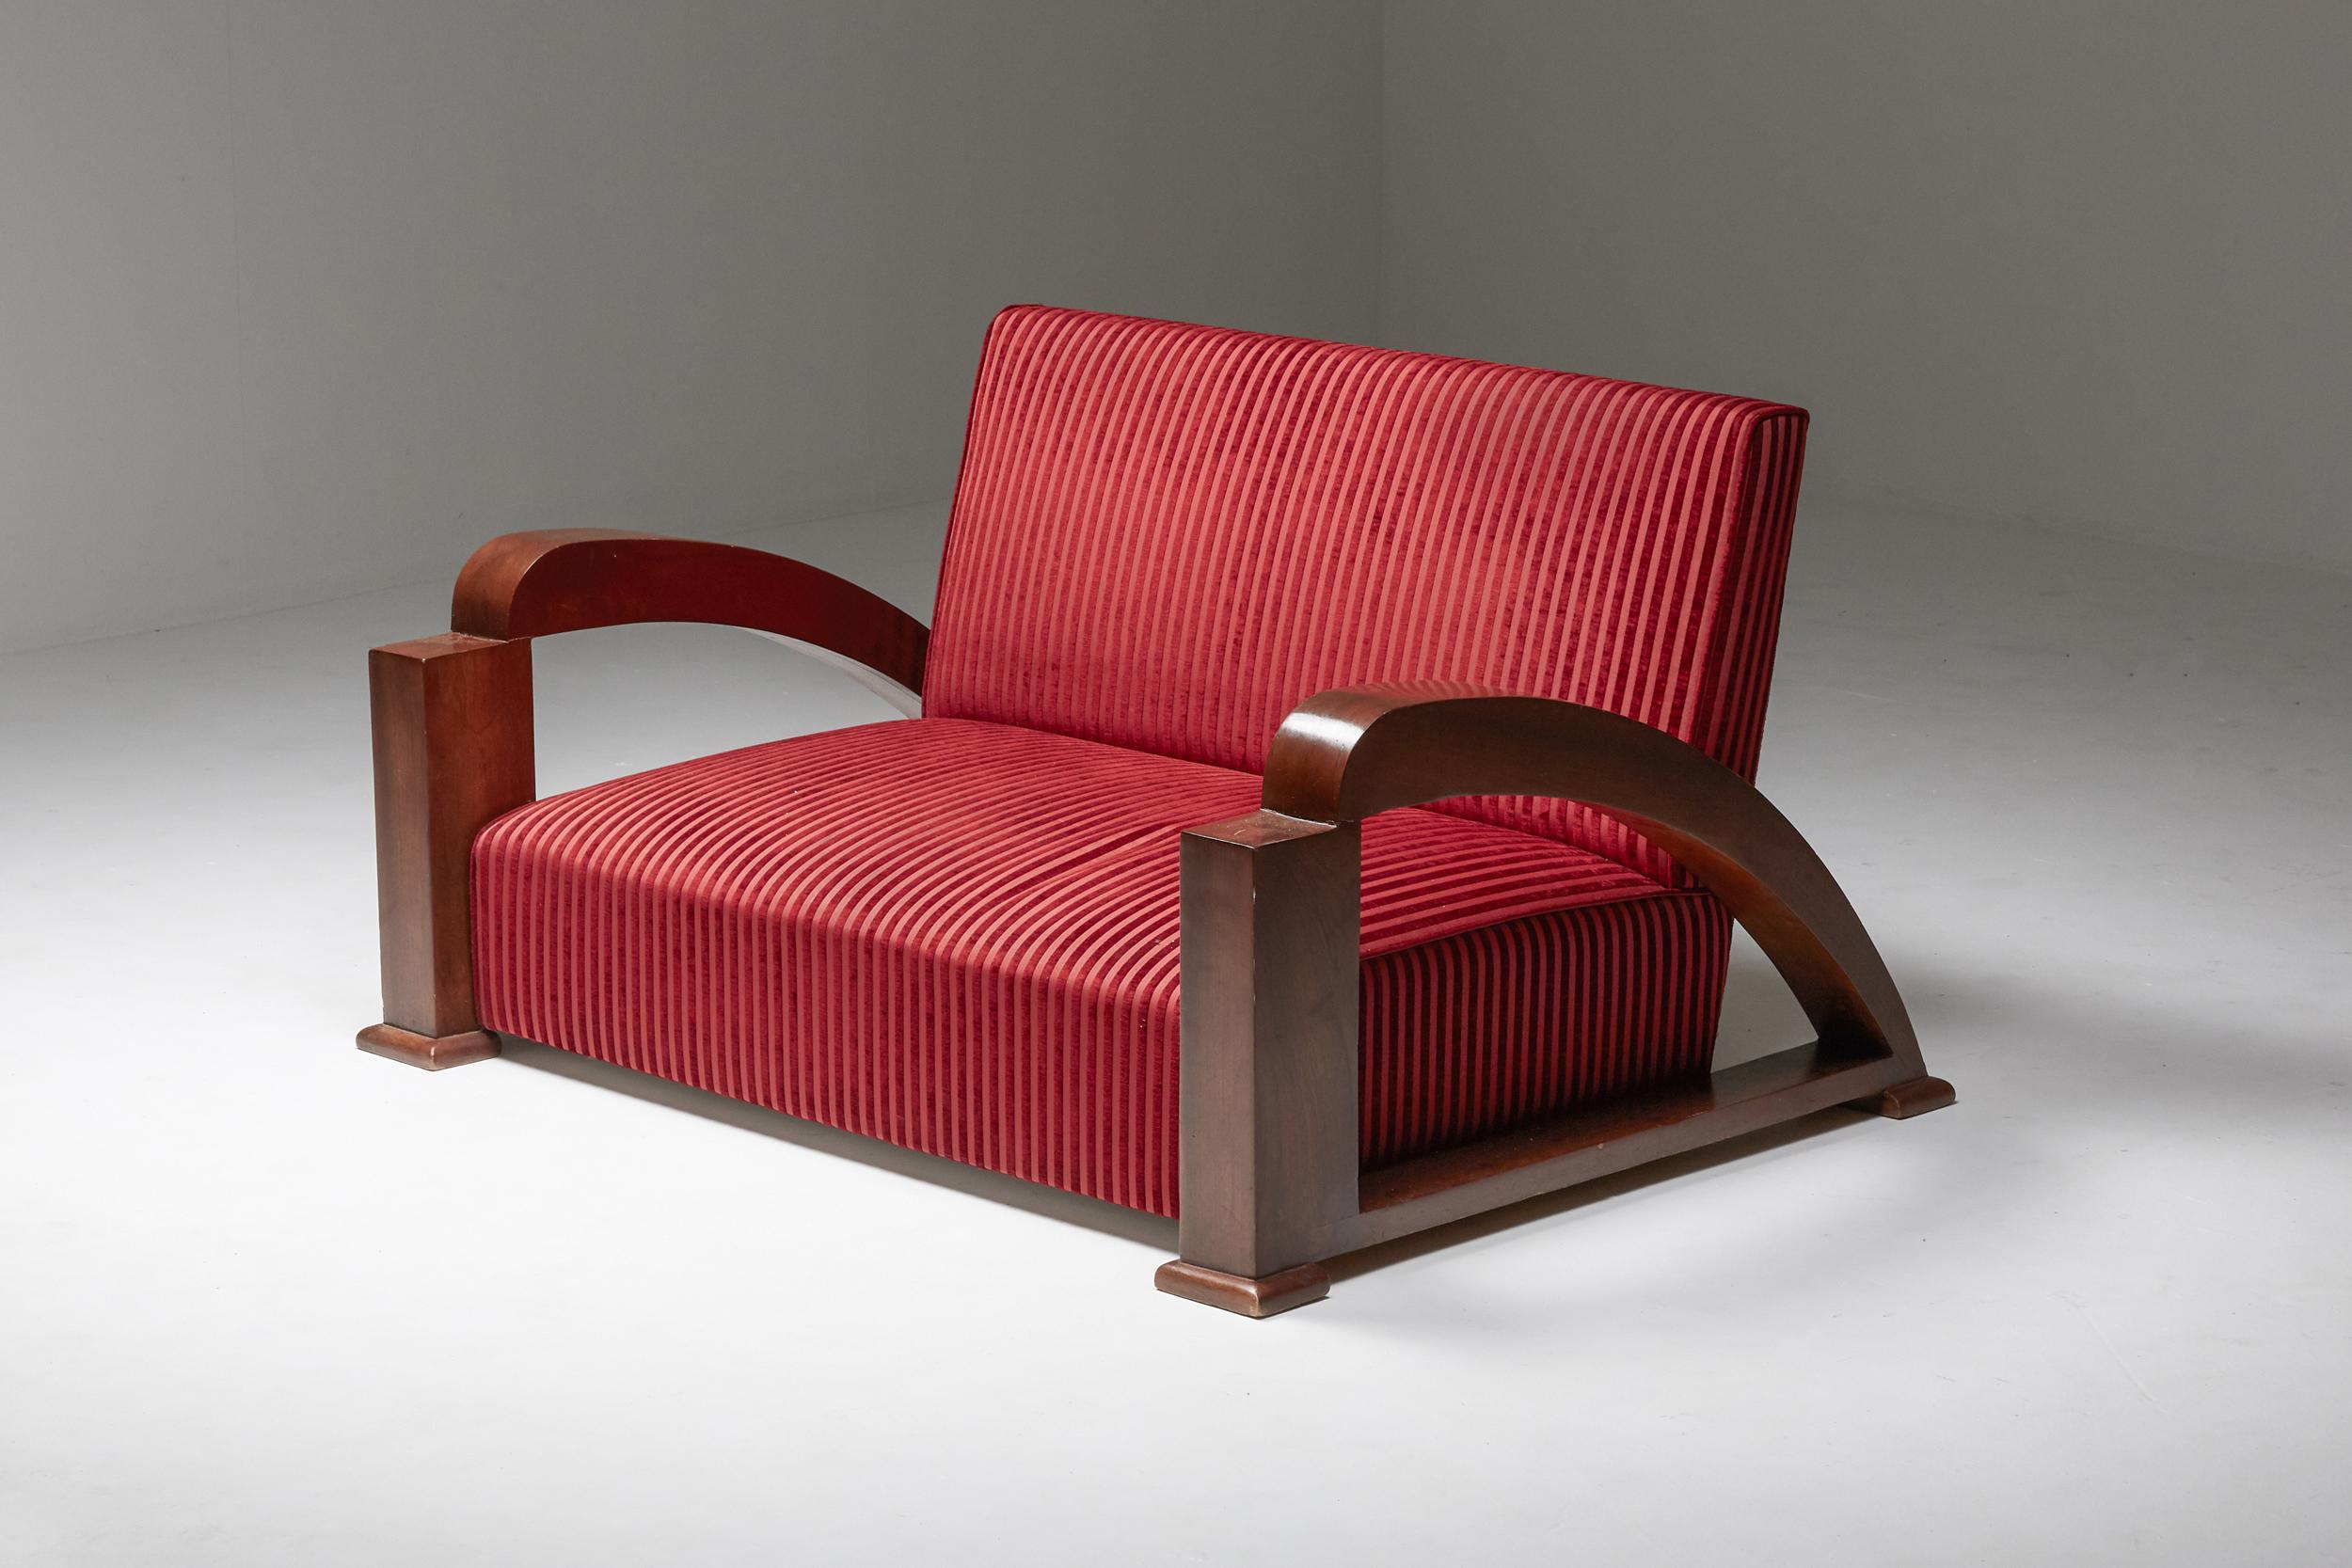 Art Deco; sofa; Settee; two-seater; living room set; Striped fabric; Red velvet; France; 1930; Jean Royère; 

This impressive Art Deco sofa dates from the beginning of the 20th century. The curvy armrests give this bulky piece an elegant and